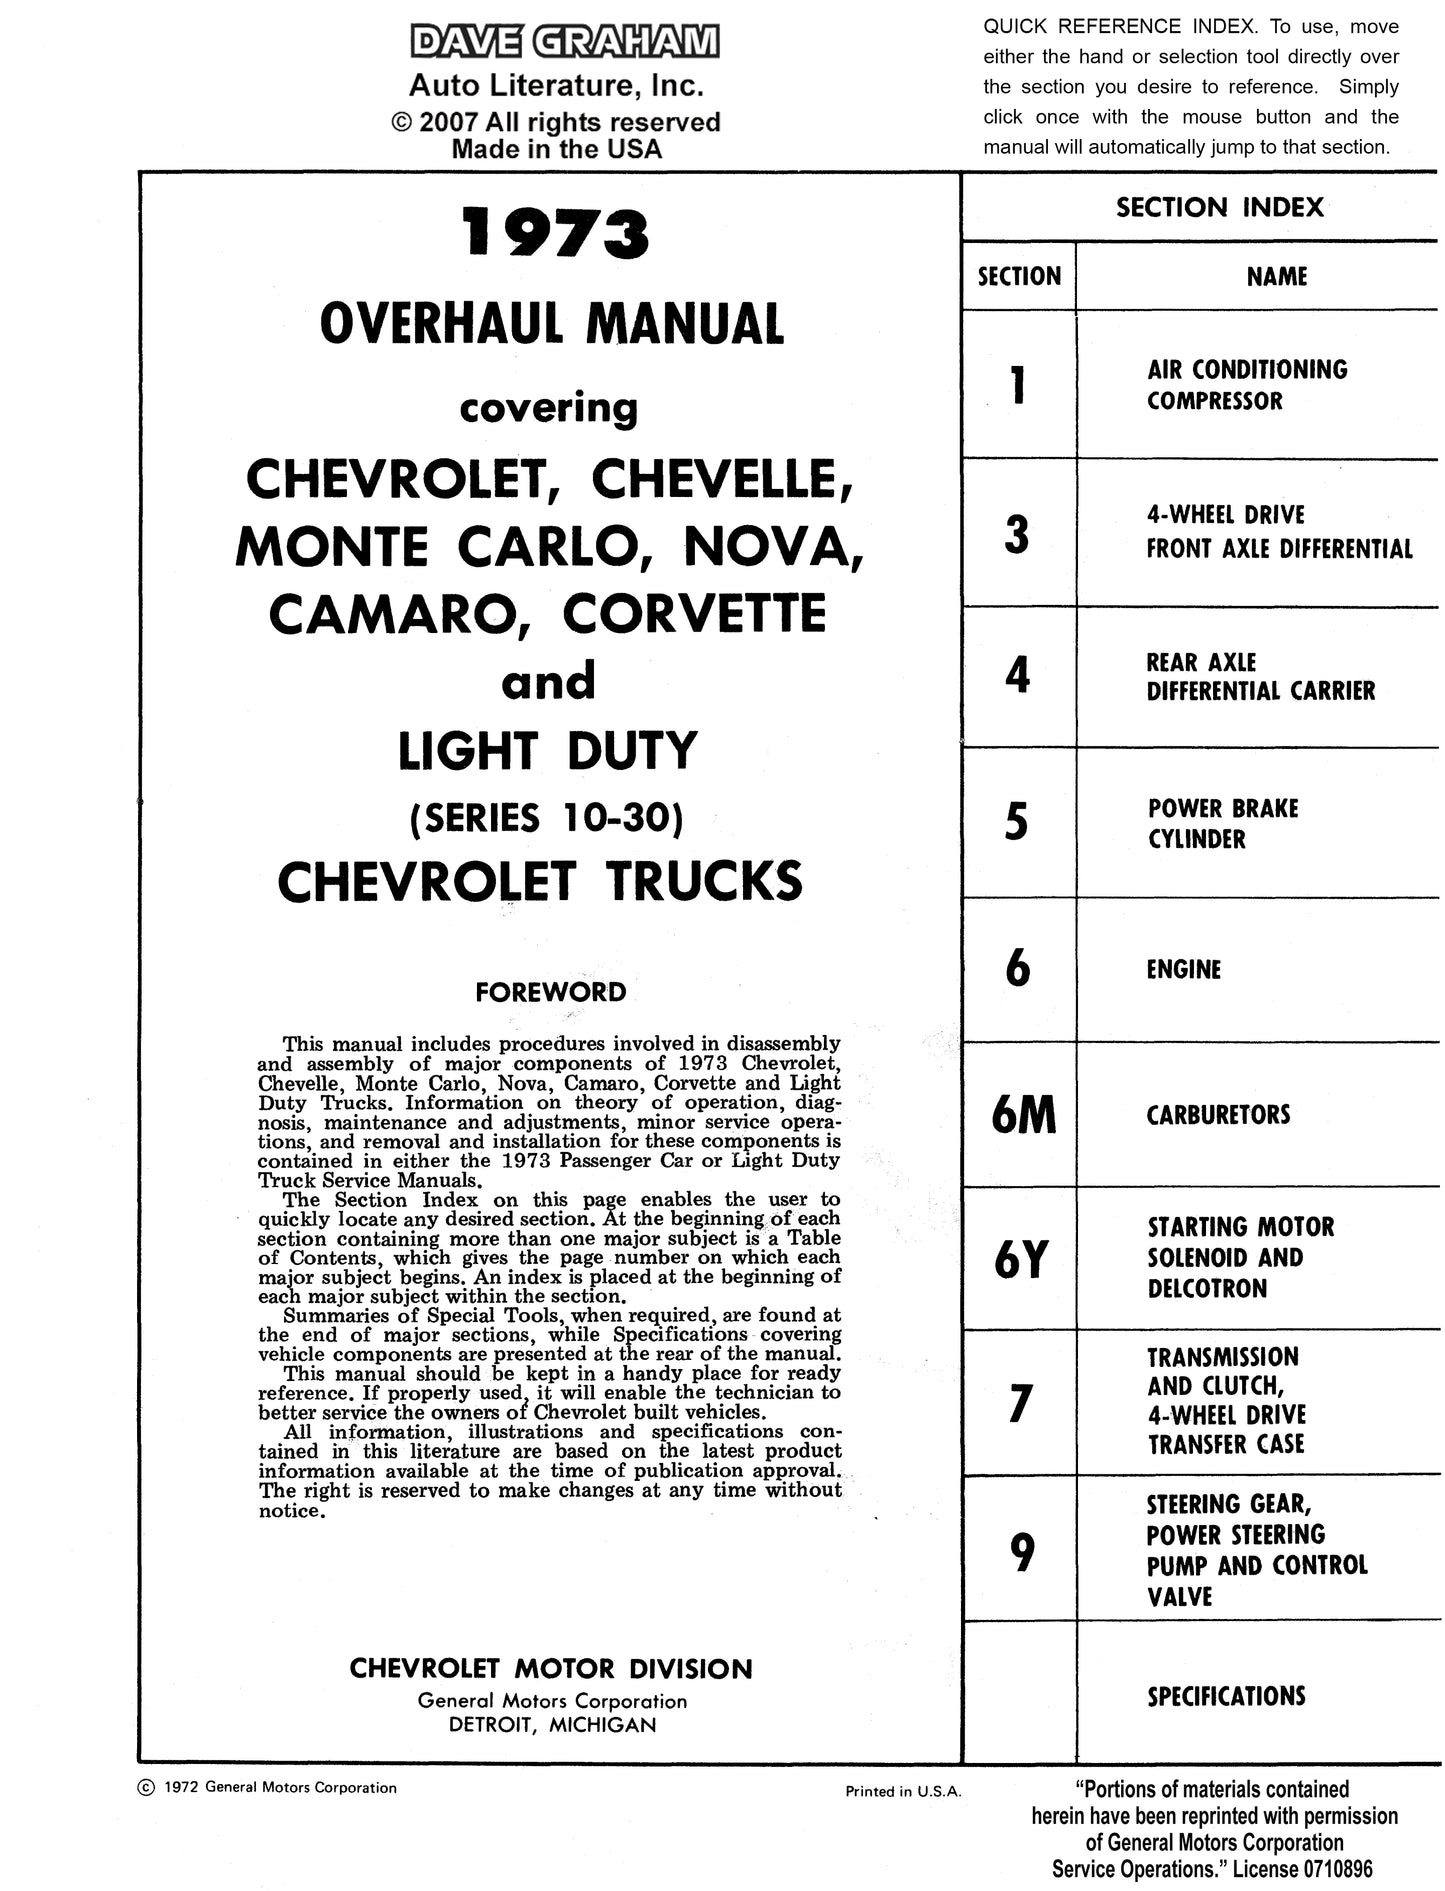 1973 Chevy Shop, Overhaul, & Body Manuals - All Models